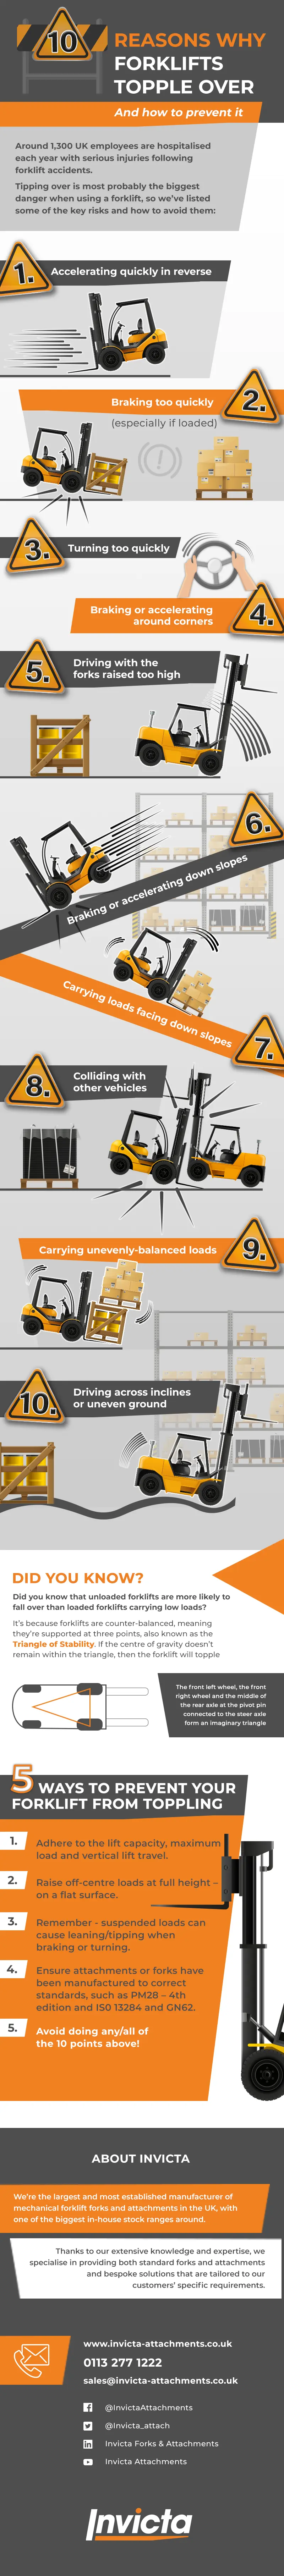 Invicta-10-reasons-why-forklifts-tip-over